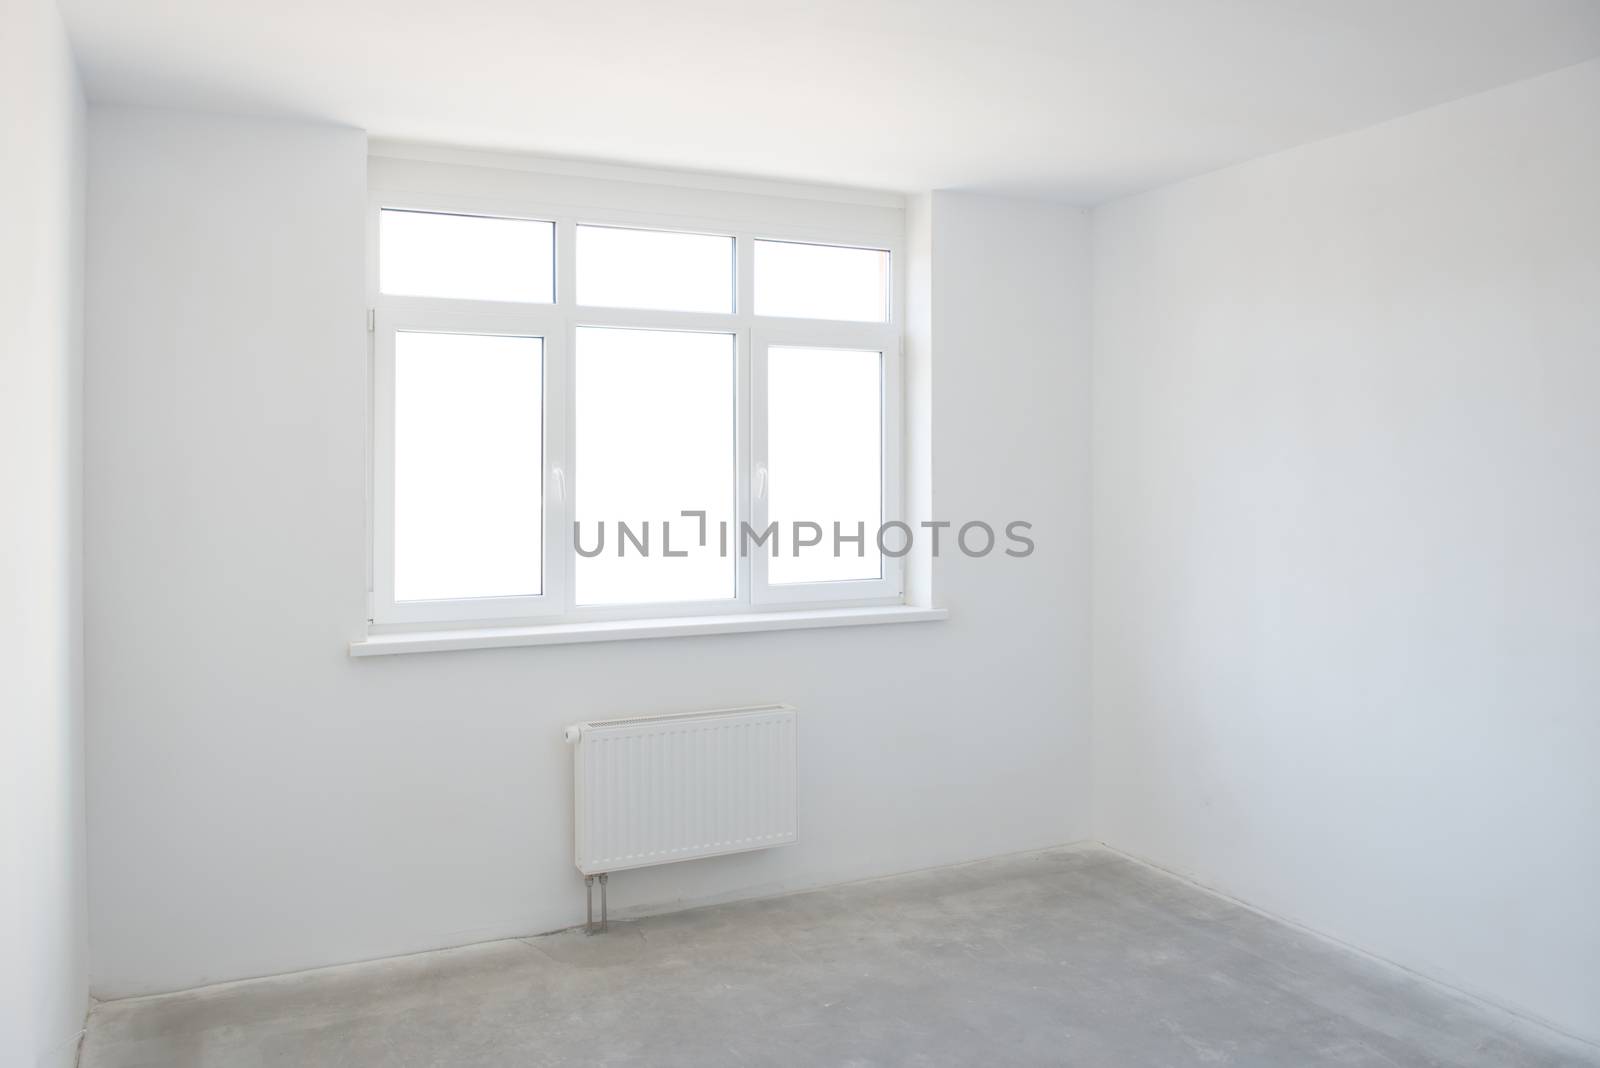 Empty white room with window full of light